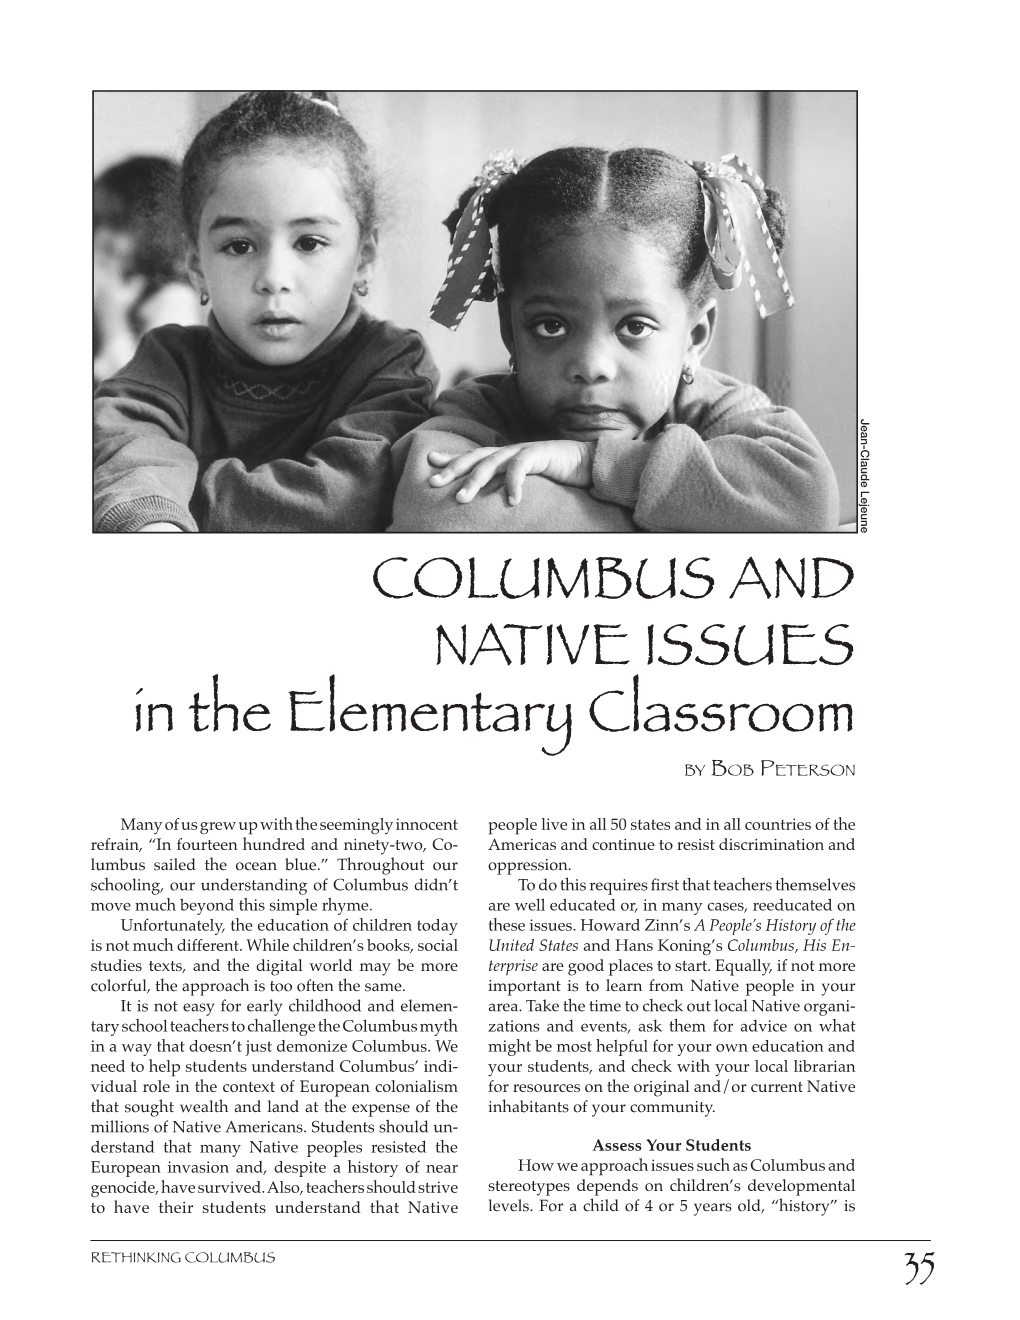 Columbus and Native Issues in the Elementary Classroom by Bob Peterson